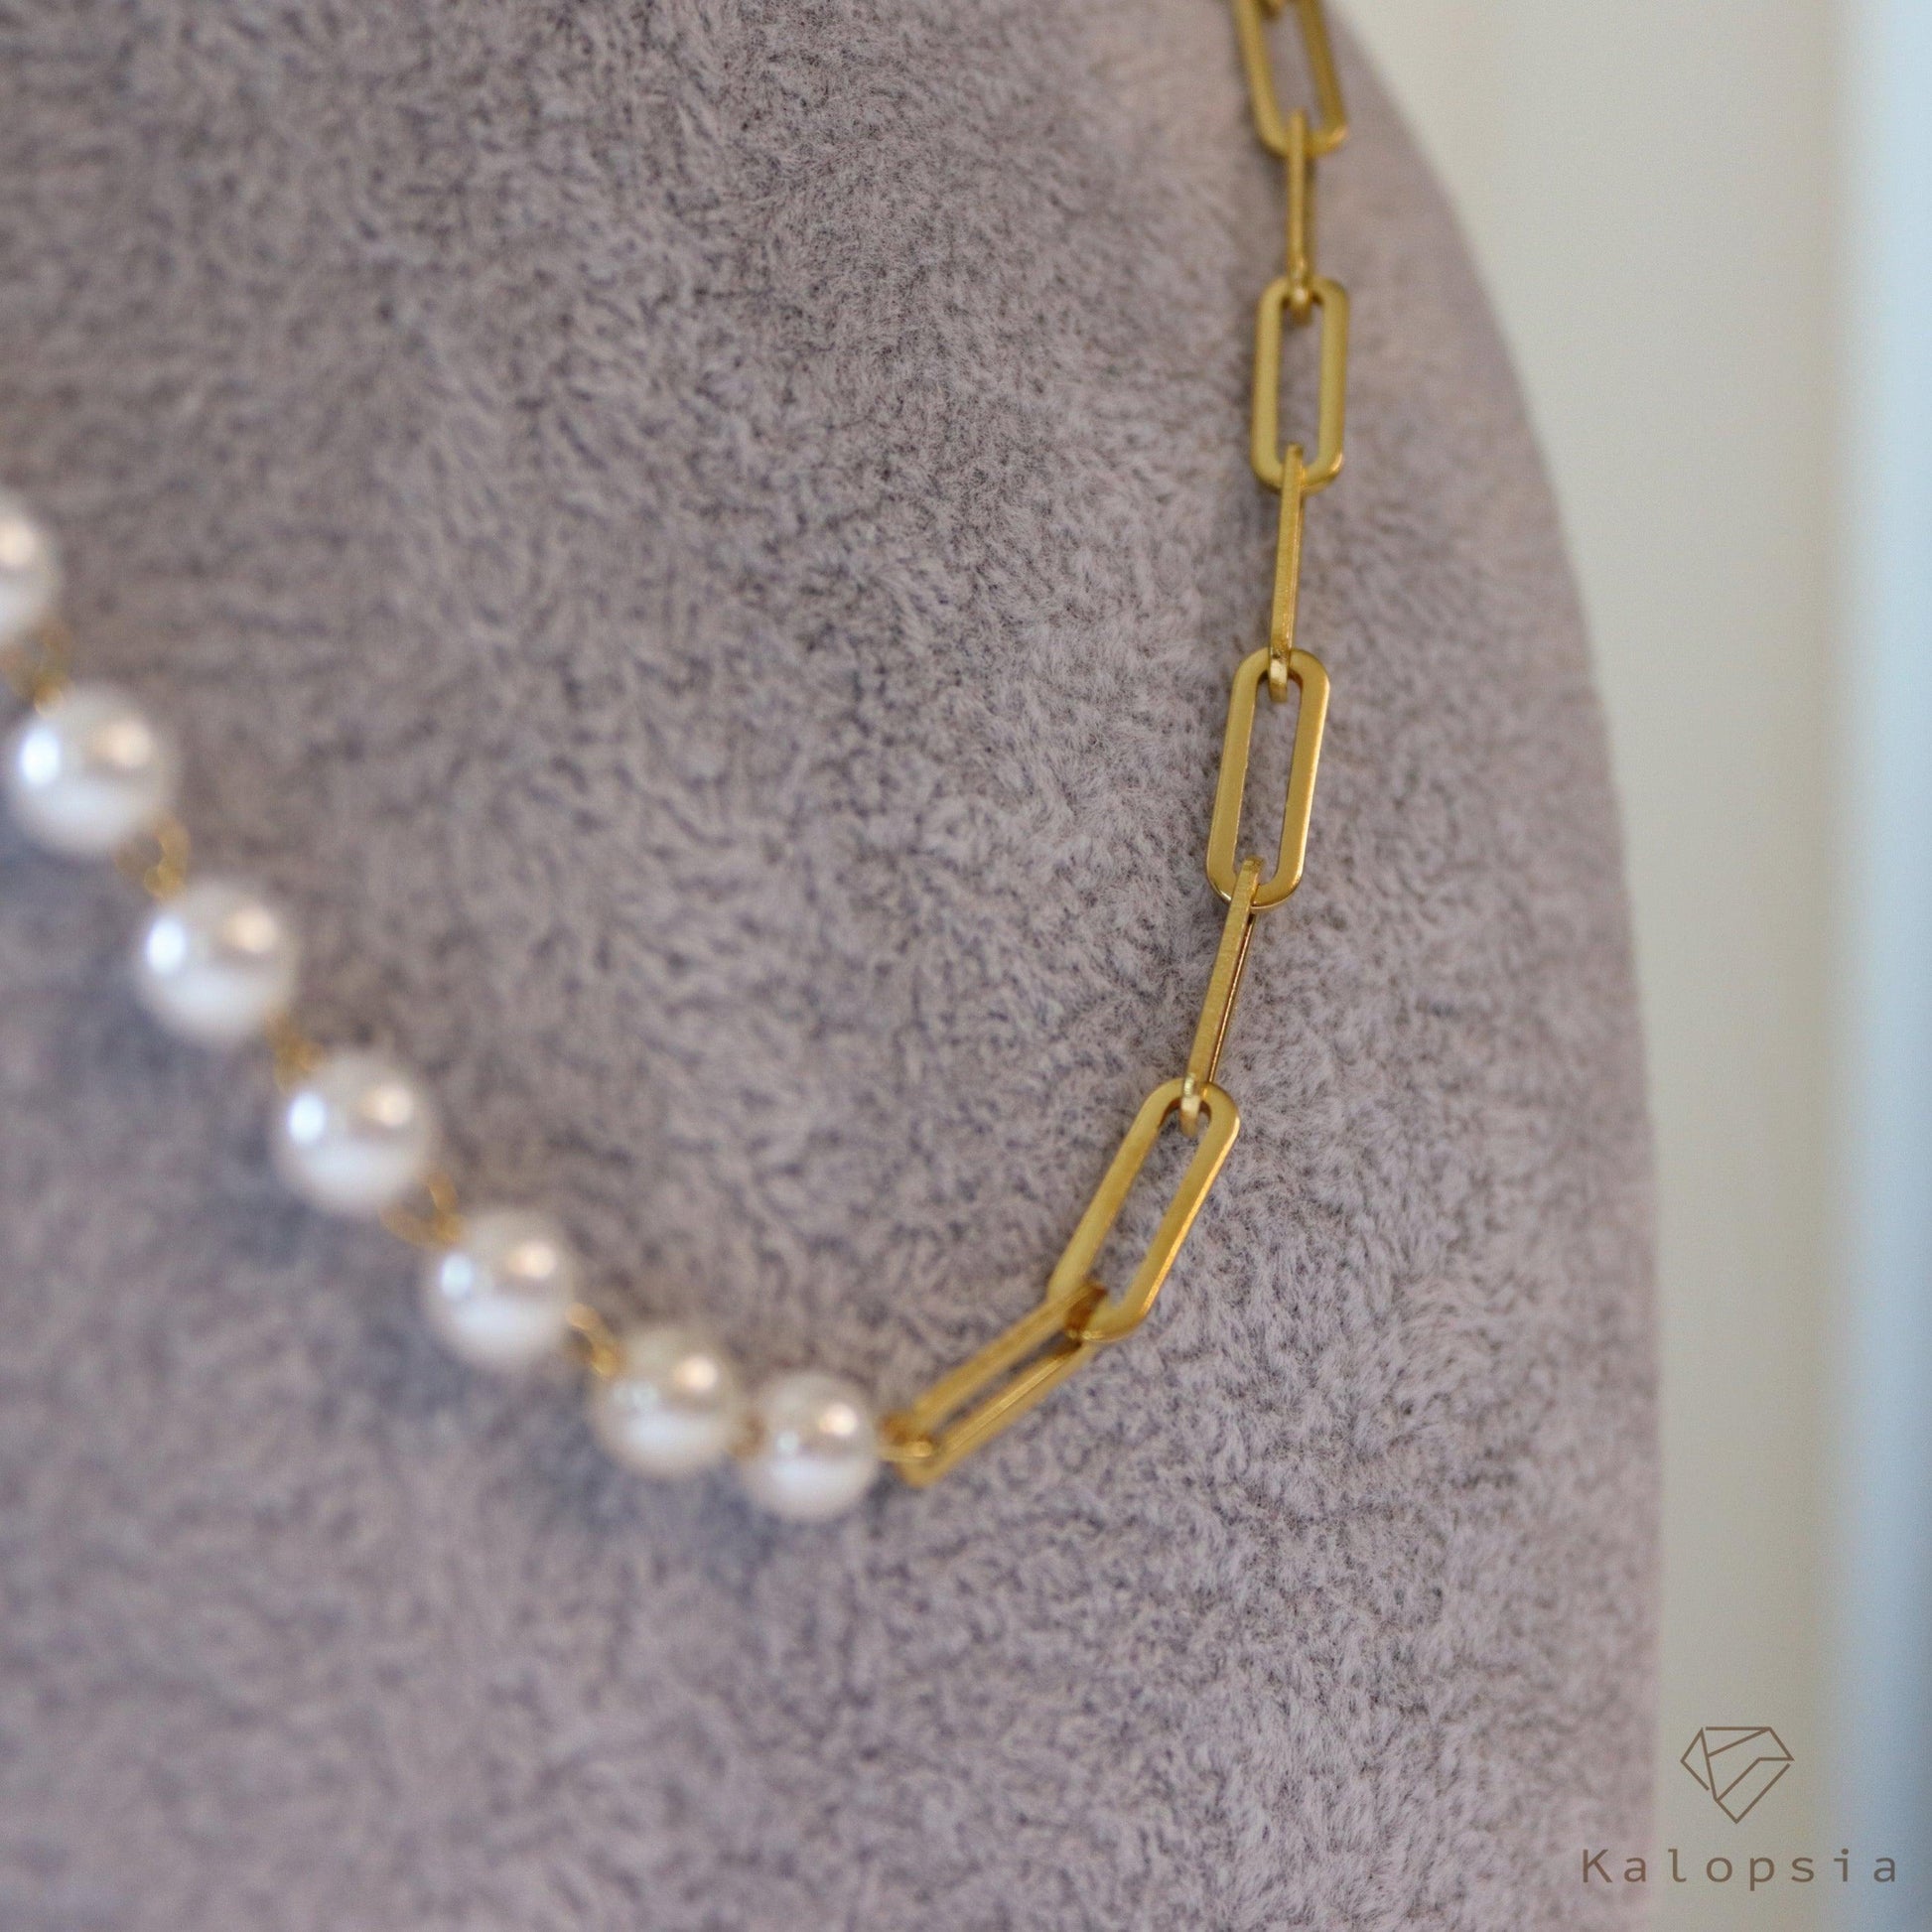 Pearls Chain Necklace - Kalopsia Accessories